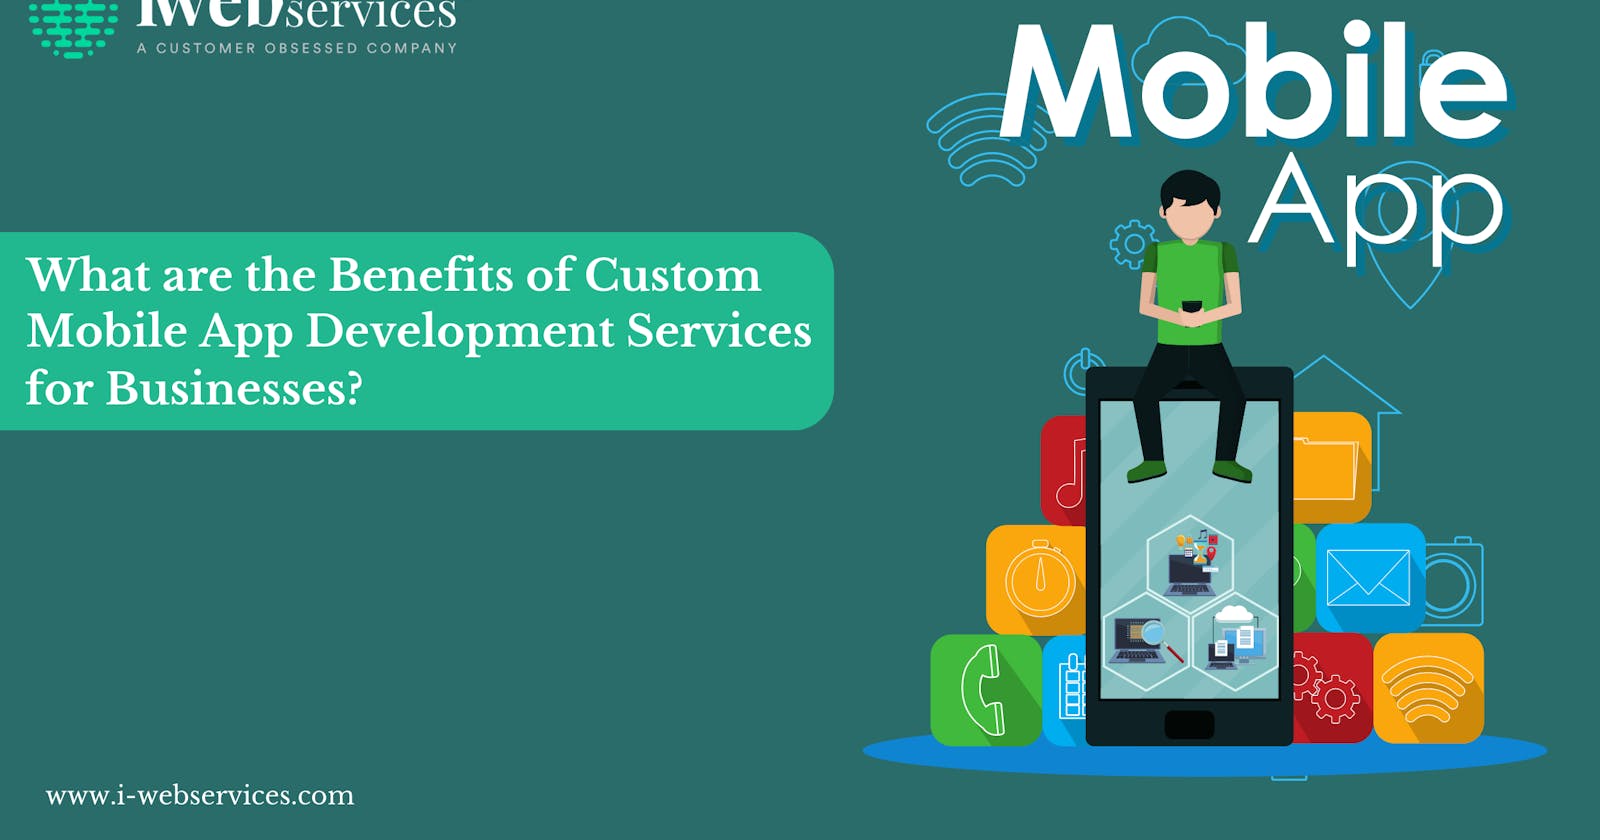 What are the Benefits of Custom Mobile App Development Services for Businesses?